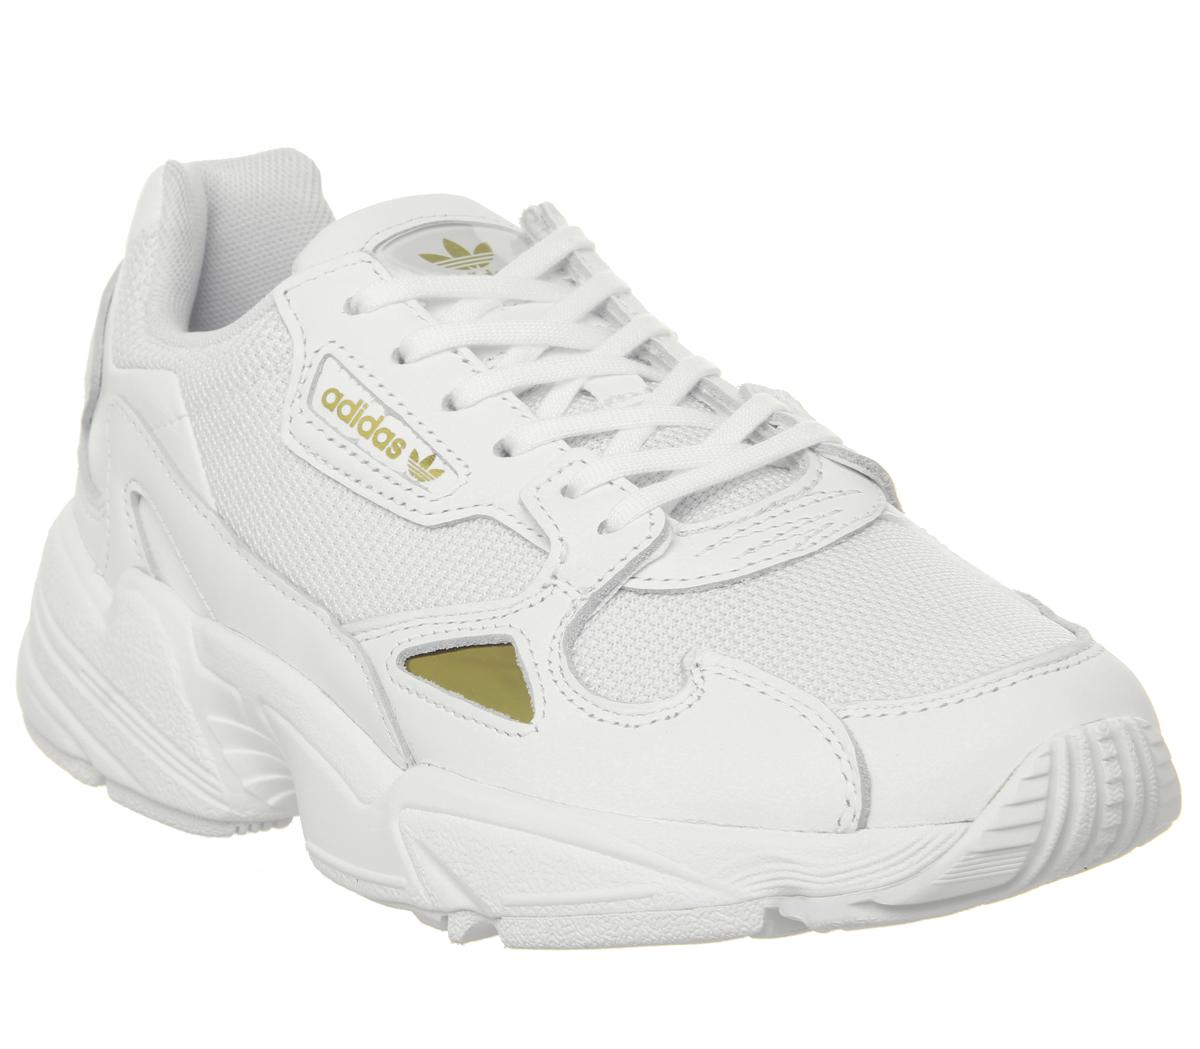 adidas originals falcon trainers in white and gold